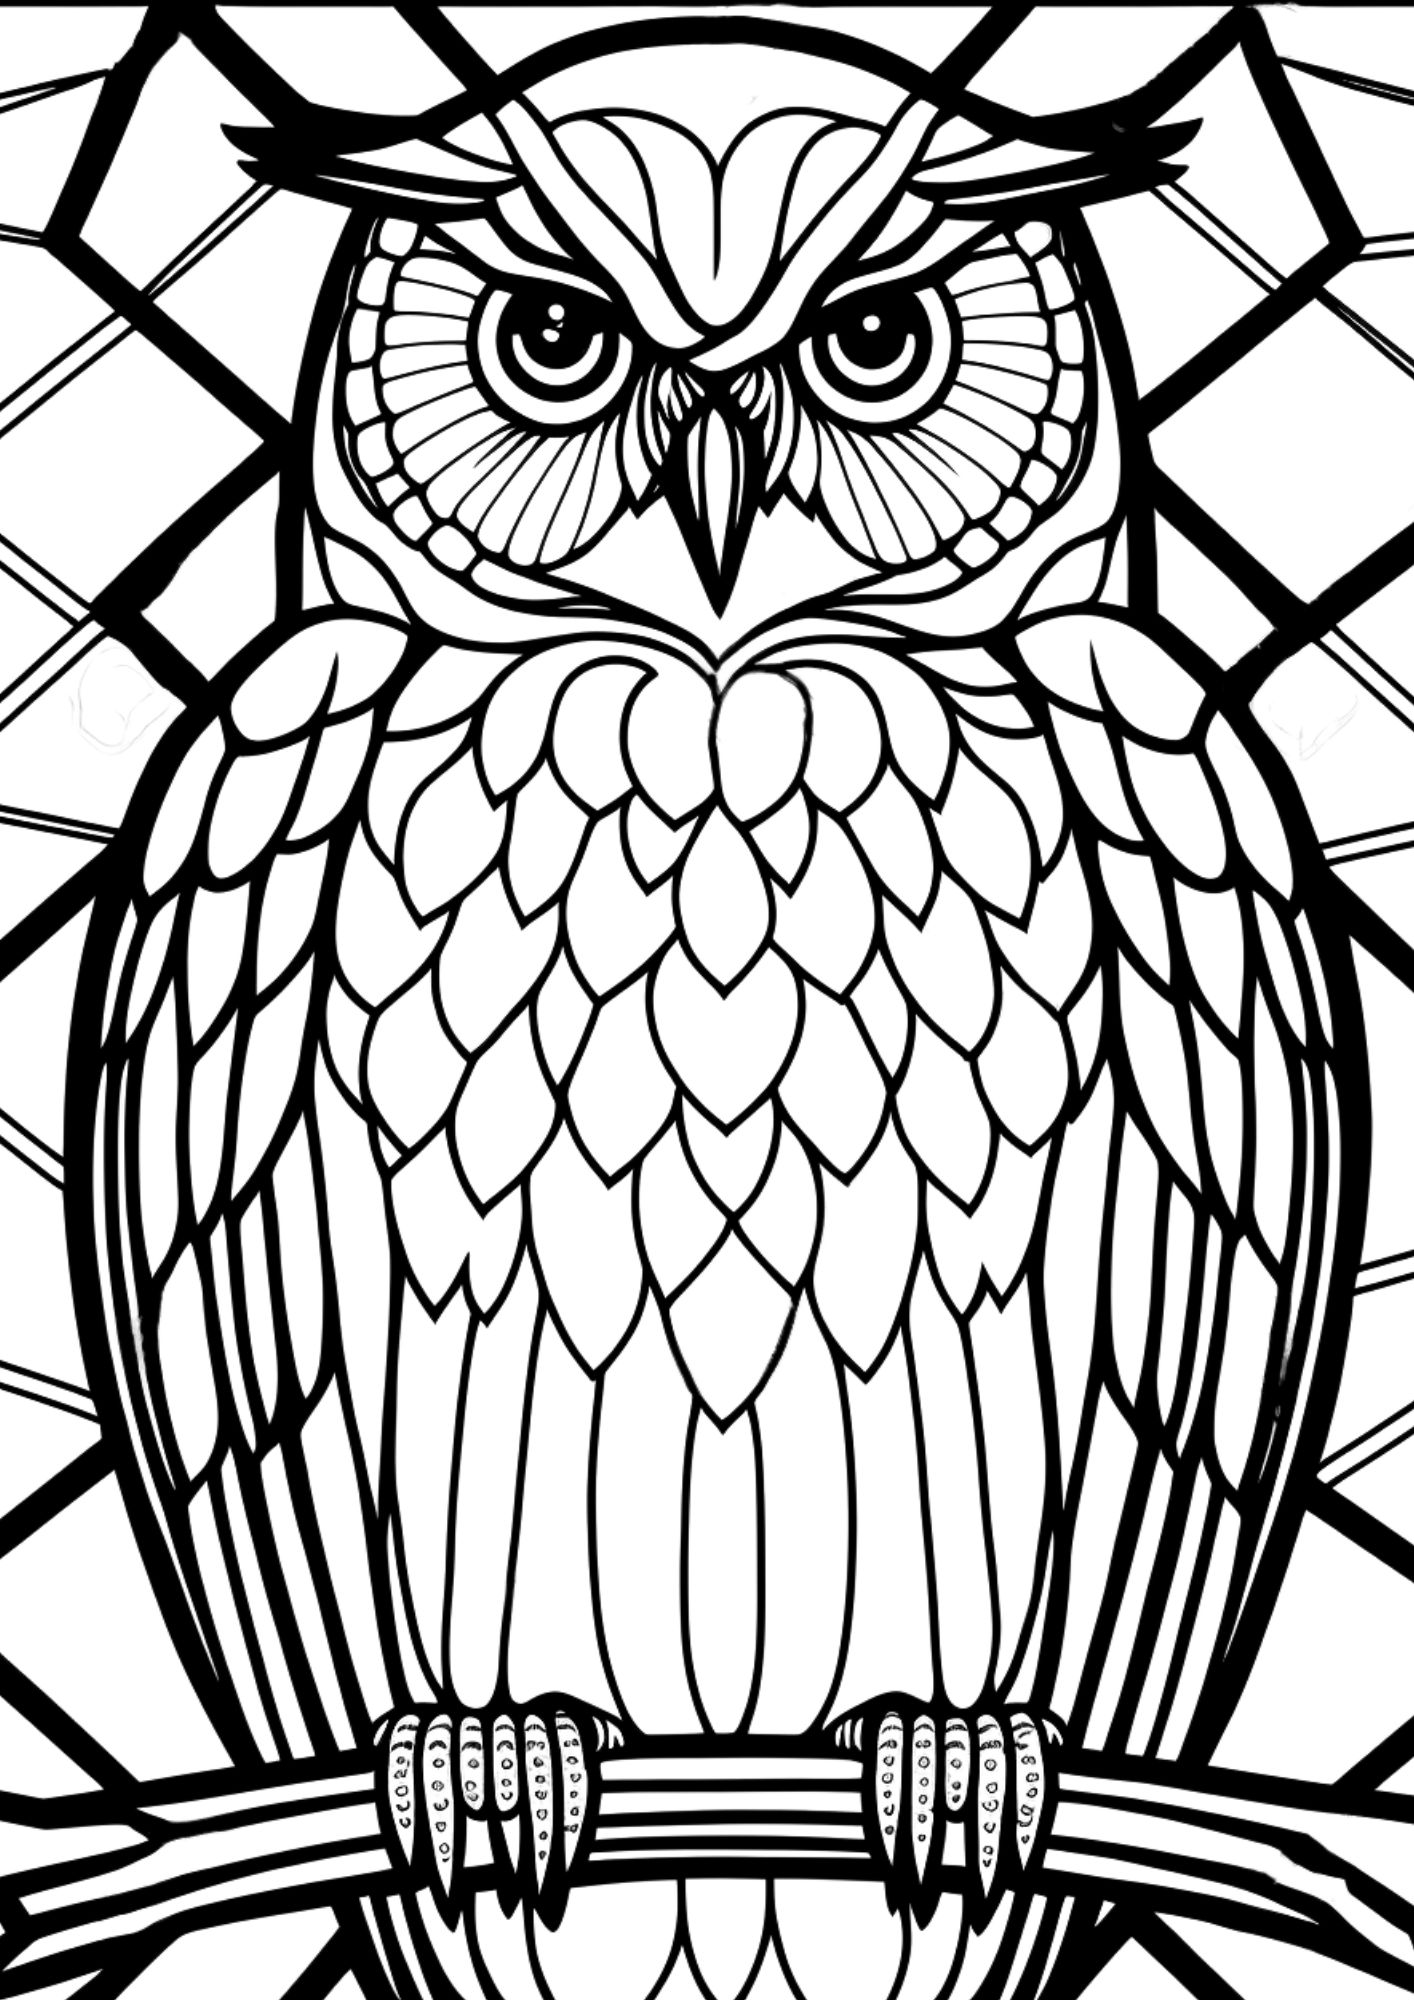 Hoot hoot owl coloring pages for everyone â free and printable